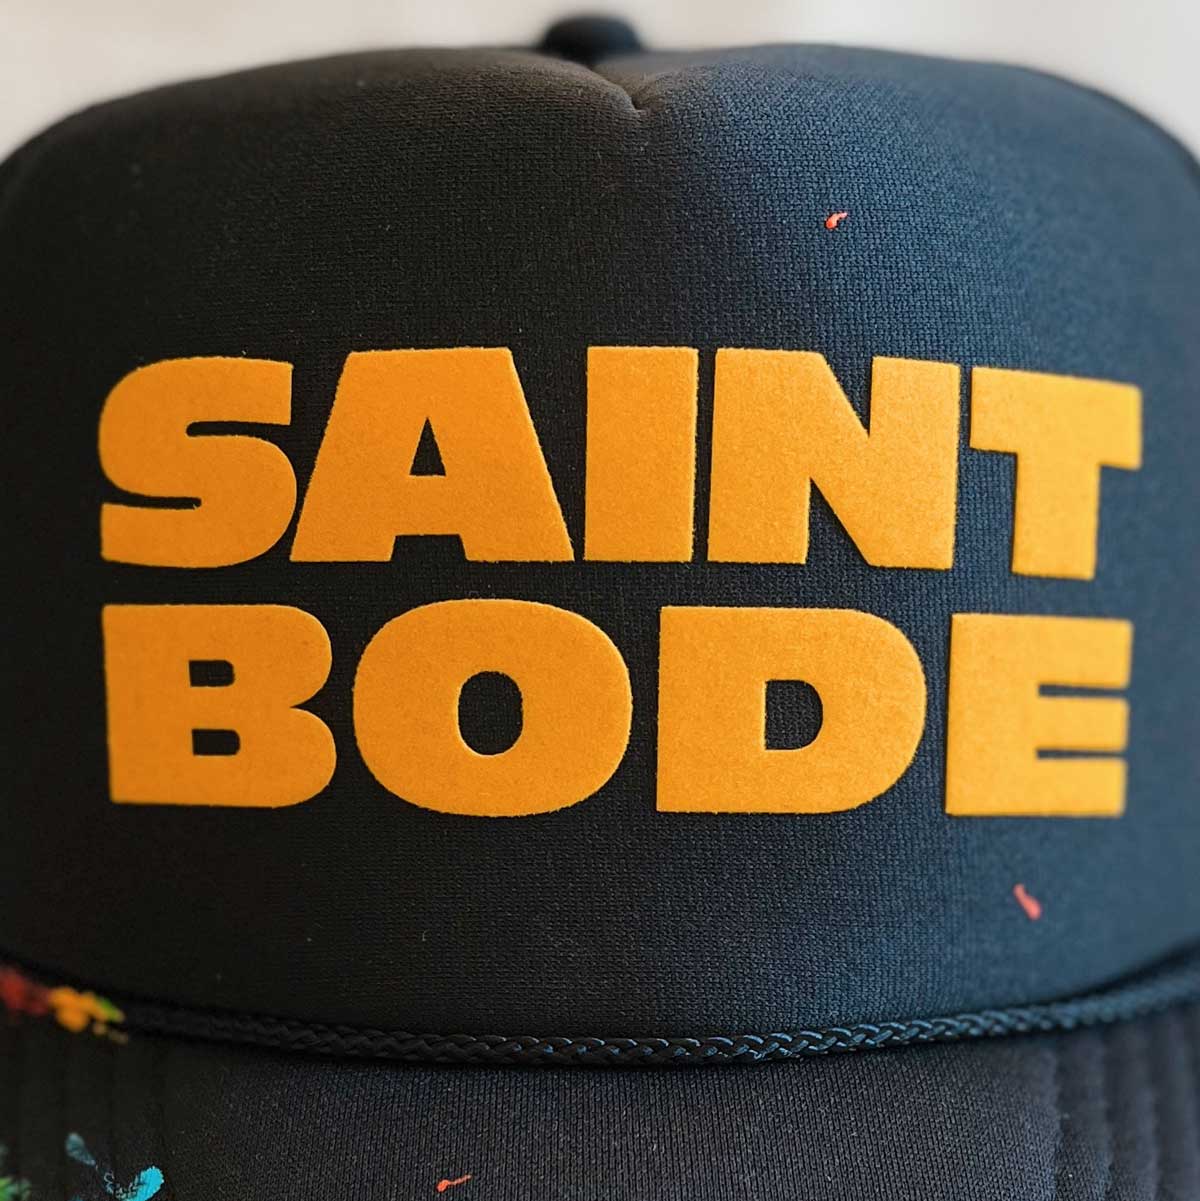 SB Hand Painted Trucker GOLD #4/11 - High Crown